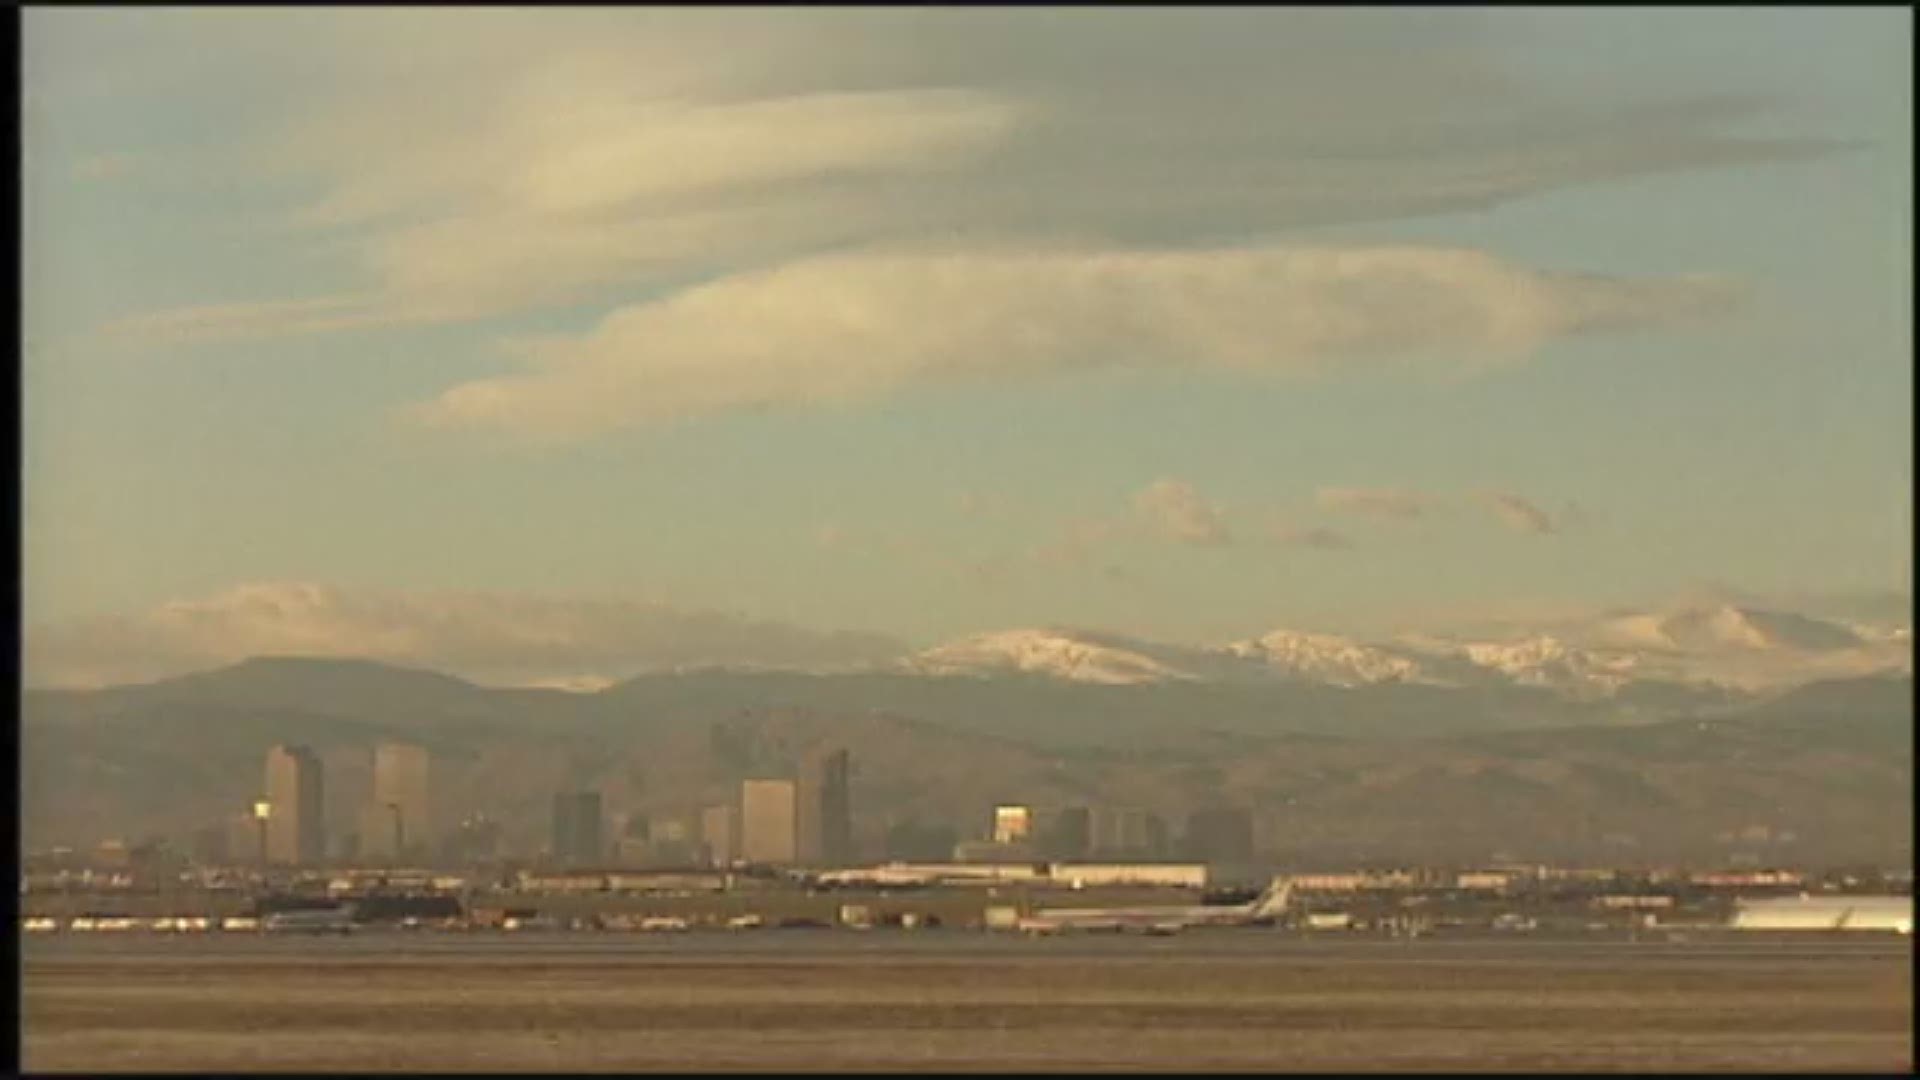 Stapleton International Airport closed on February 27, 1995. At the time, it was hard to say goodbye. Watch Denver residents come to terms with the loss of their air